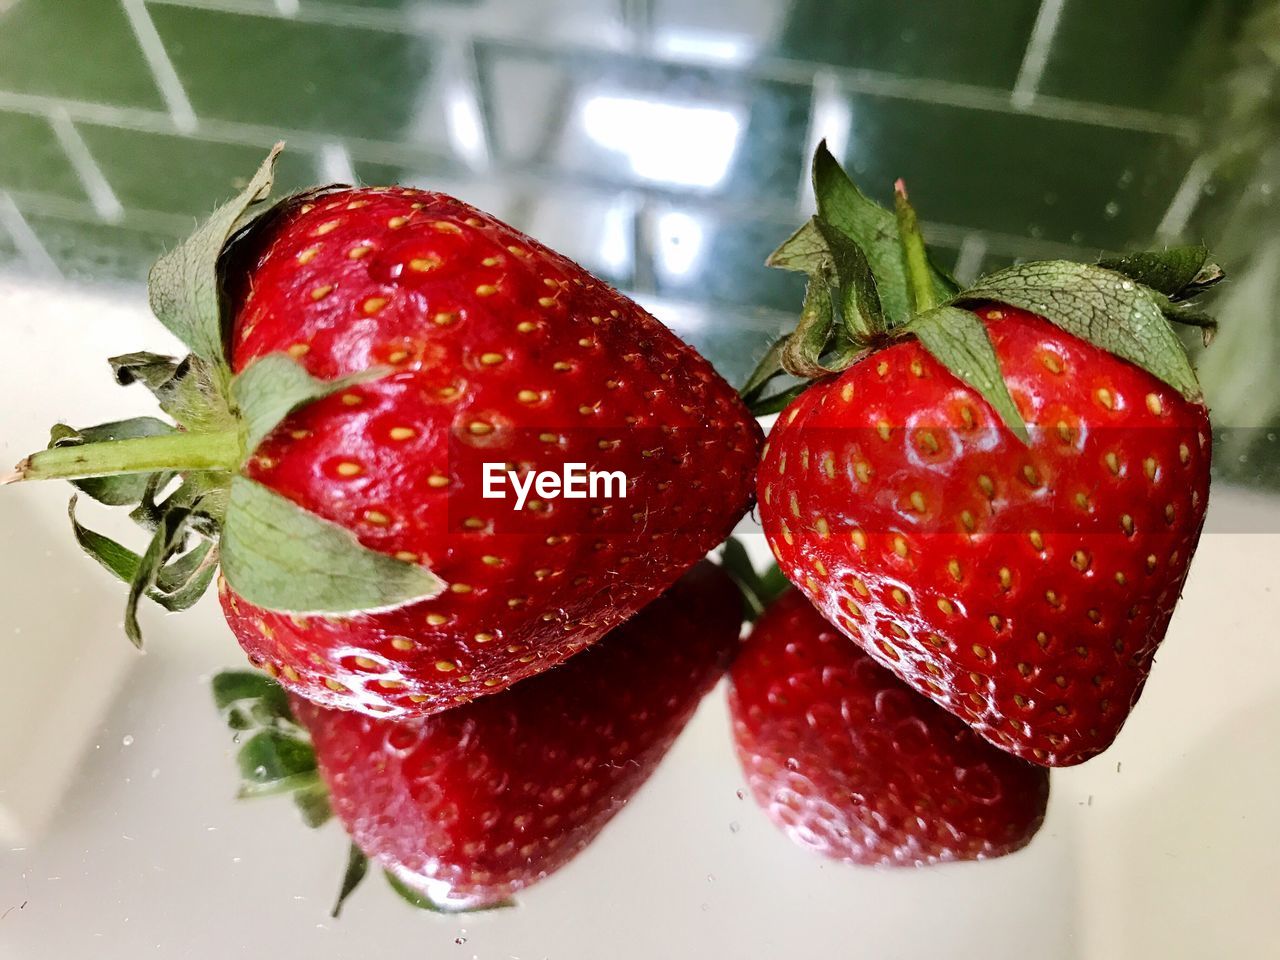 CLOSE-UP OF STRAWBERRIES WITH STRAWBERRY